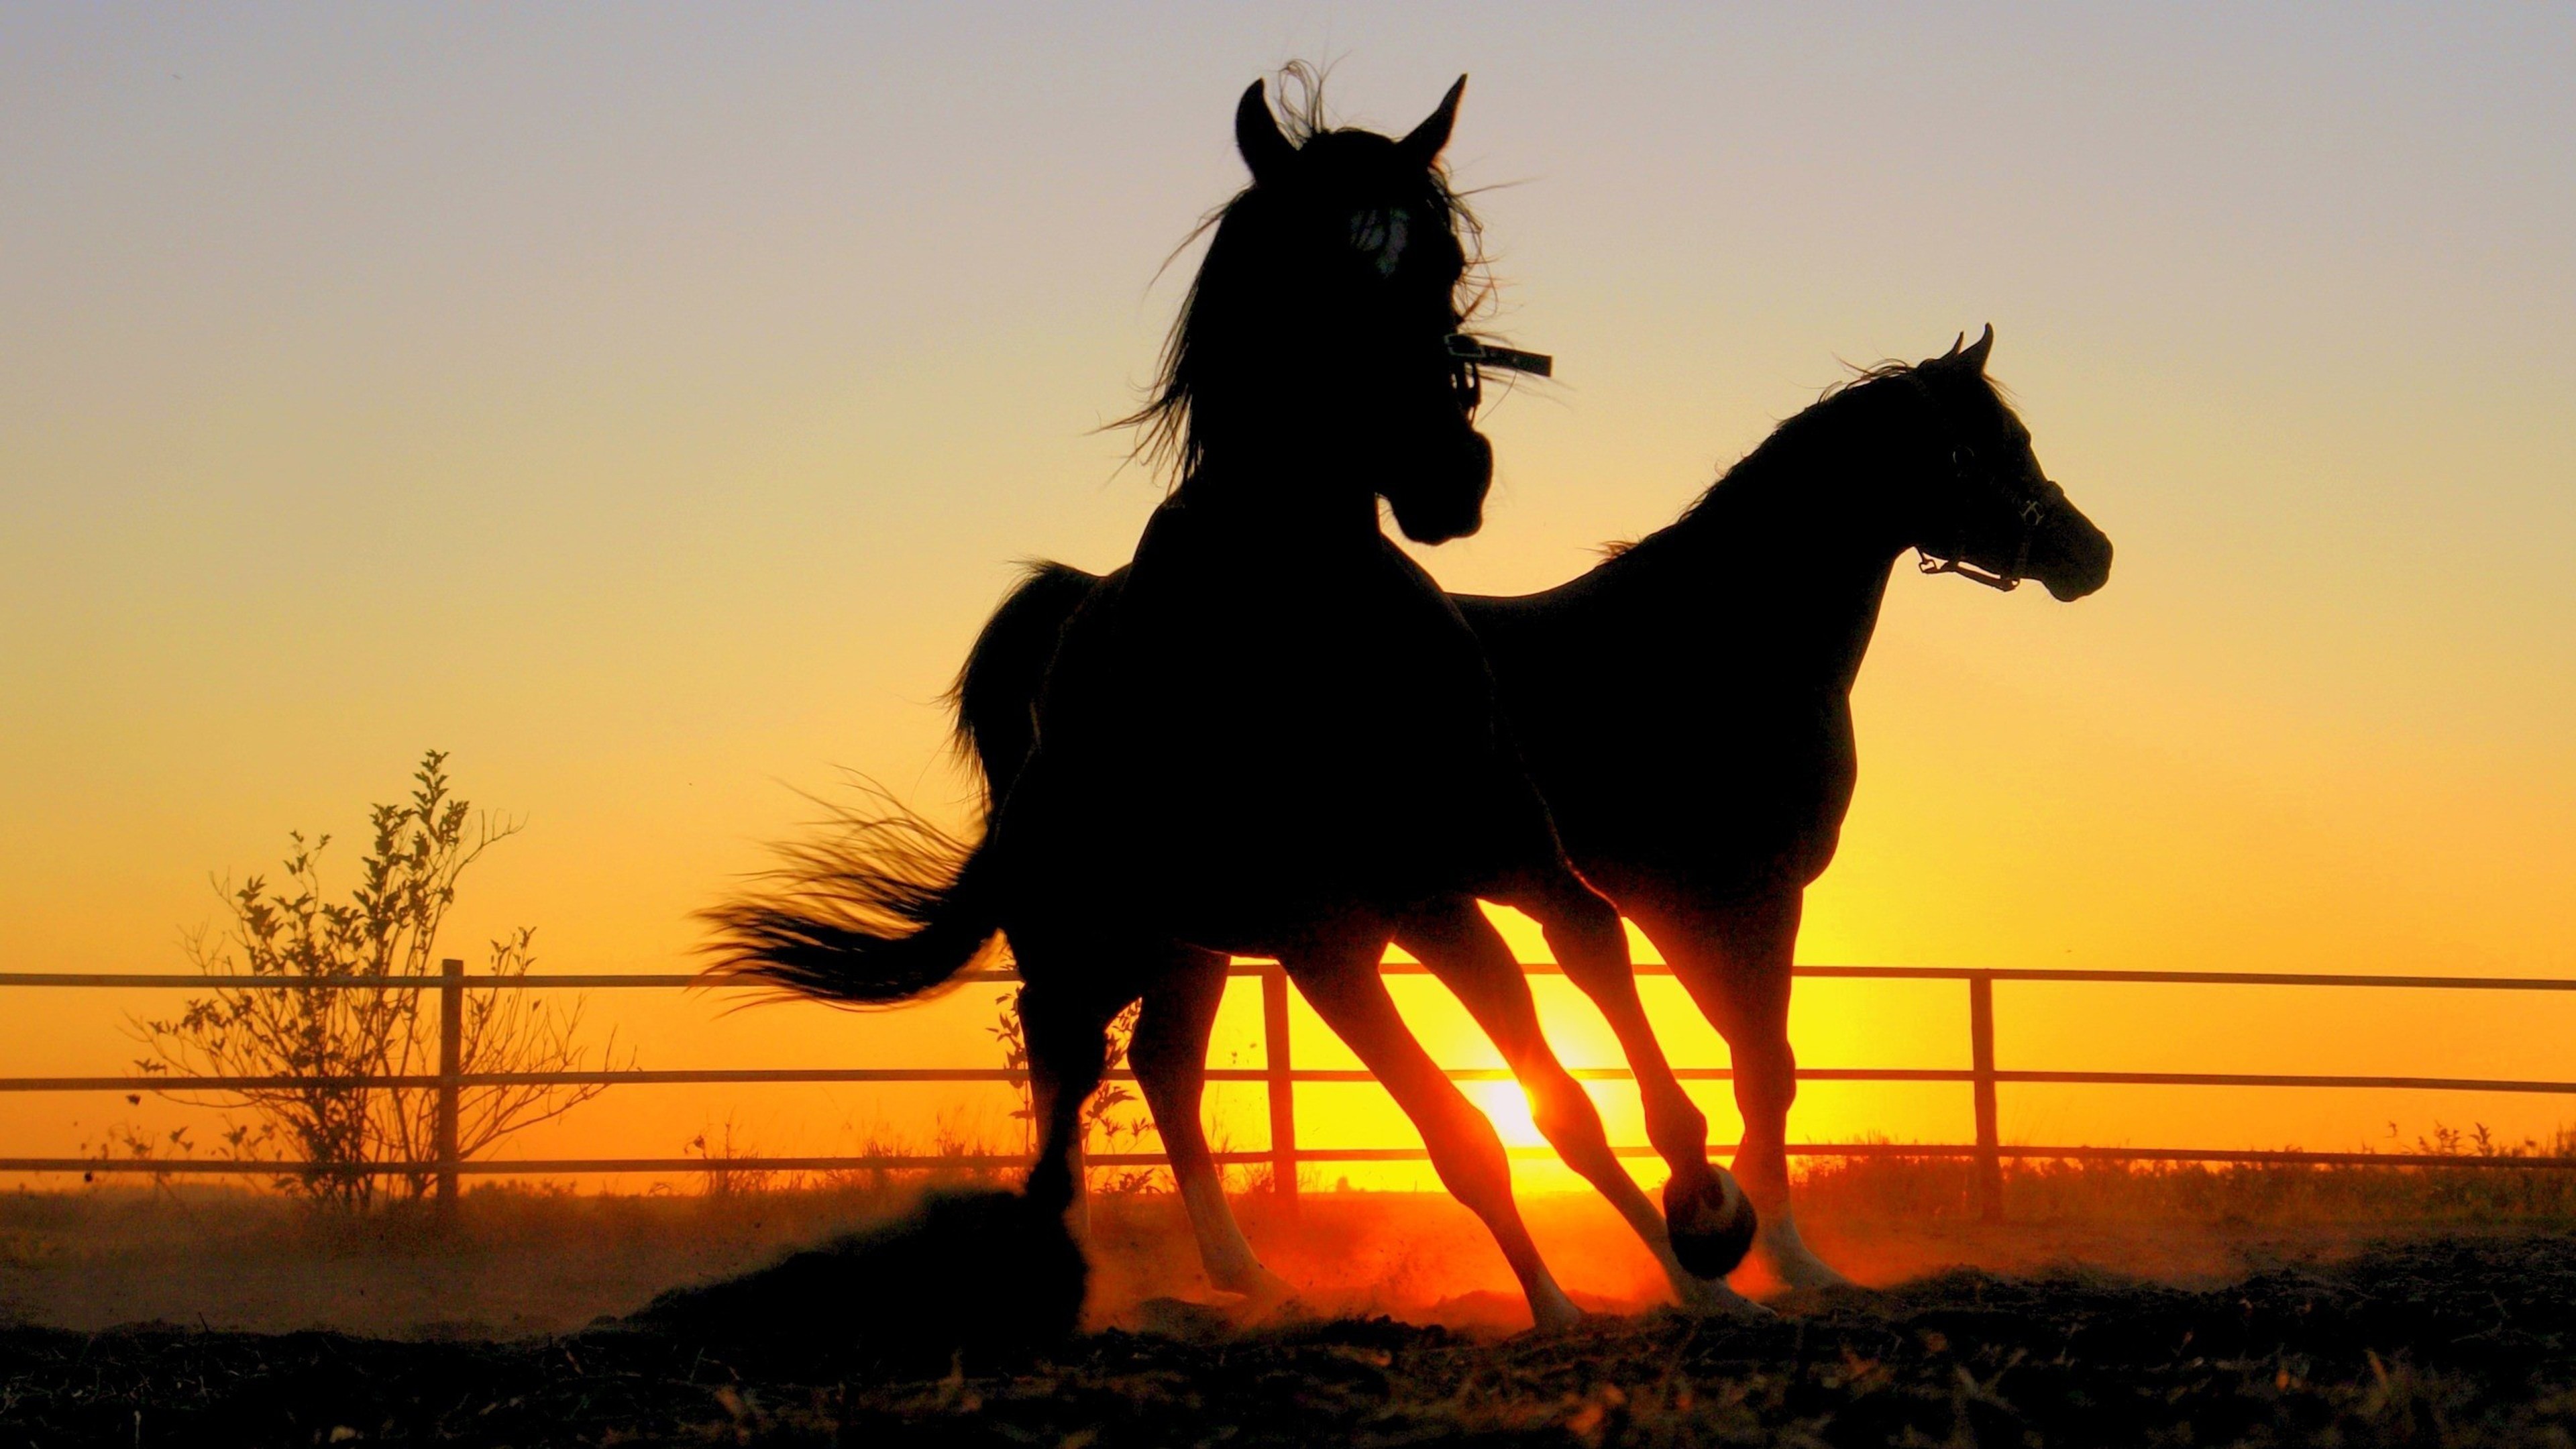 3840x2160 Download Free Black Horse Picture.